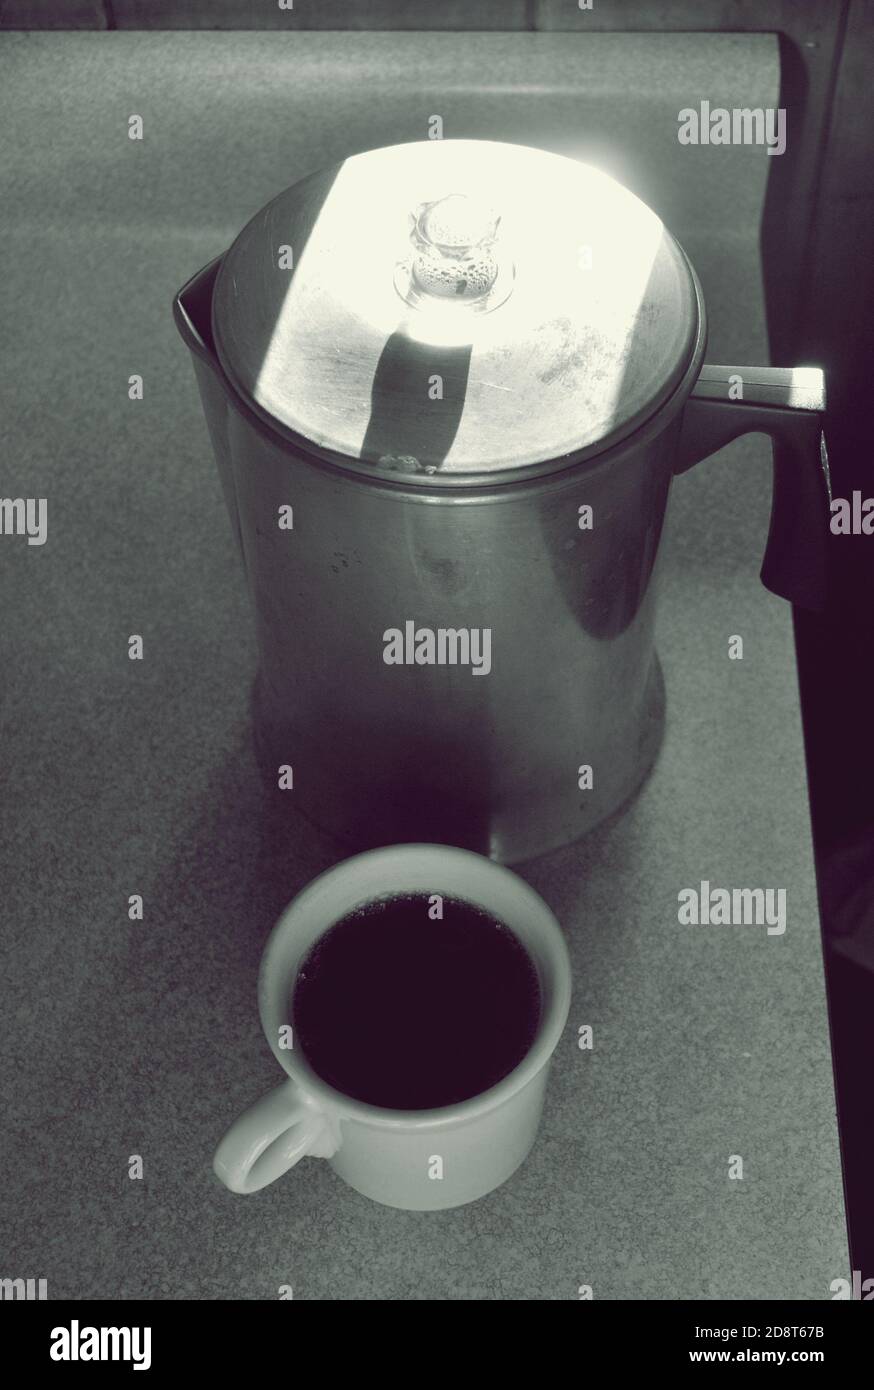 https://c8.alamy.com/comp/2D8T67B/old-fashion-coffee-pot-and-white-mug-with-coffee-in-it-with-black-and-white-filter-2D8T67B.jpg